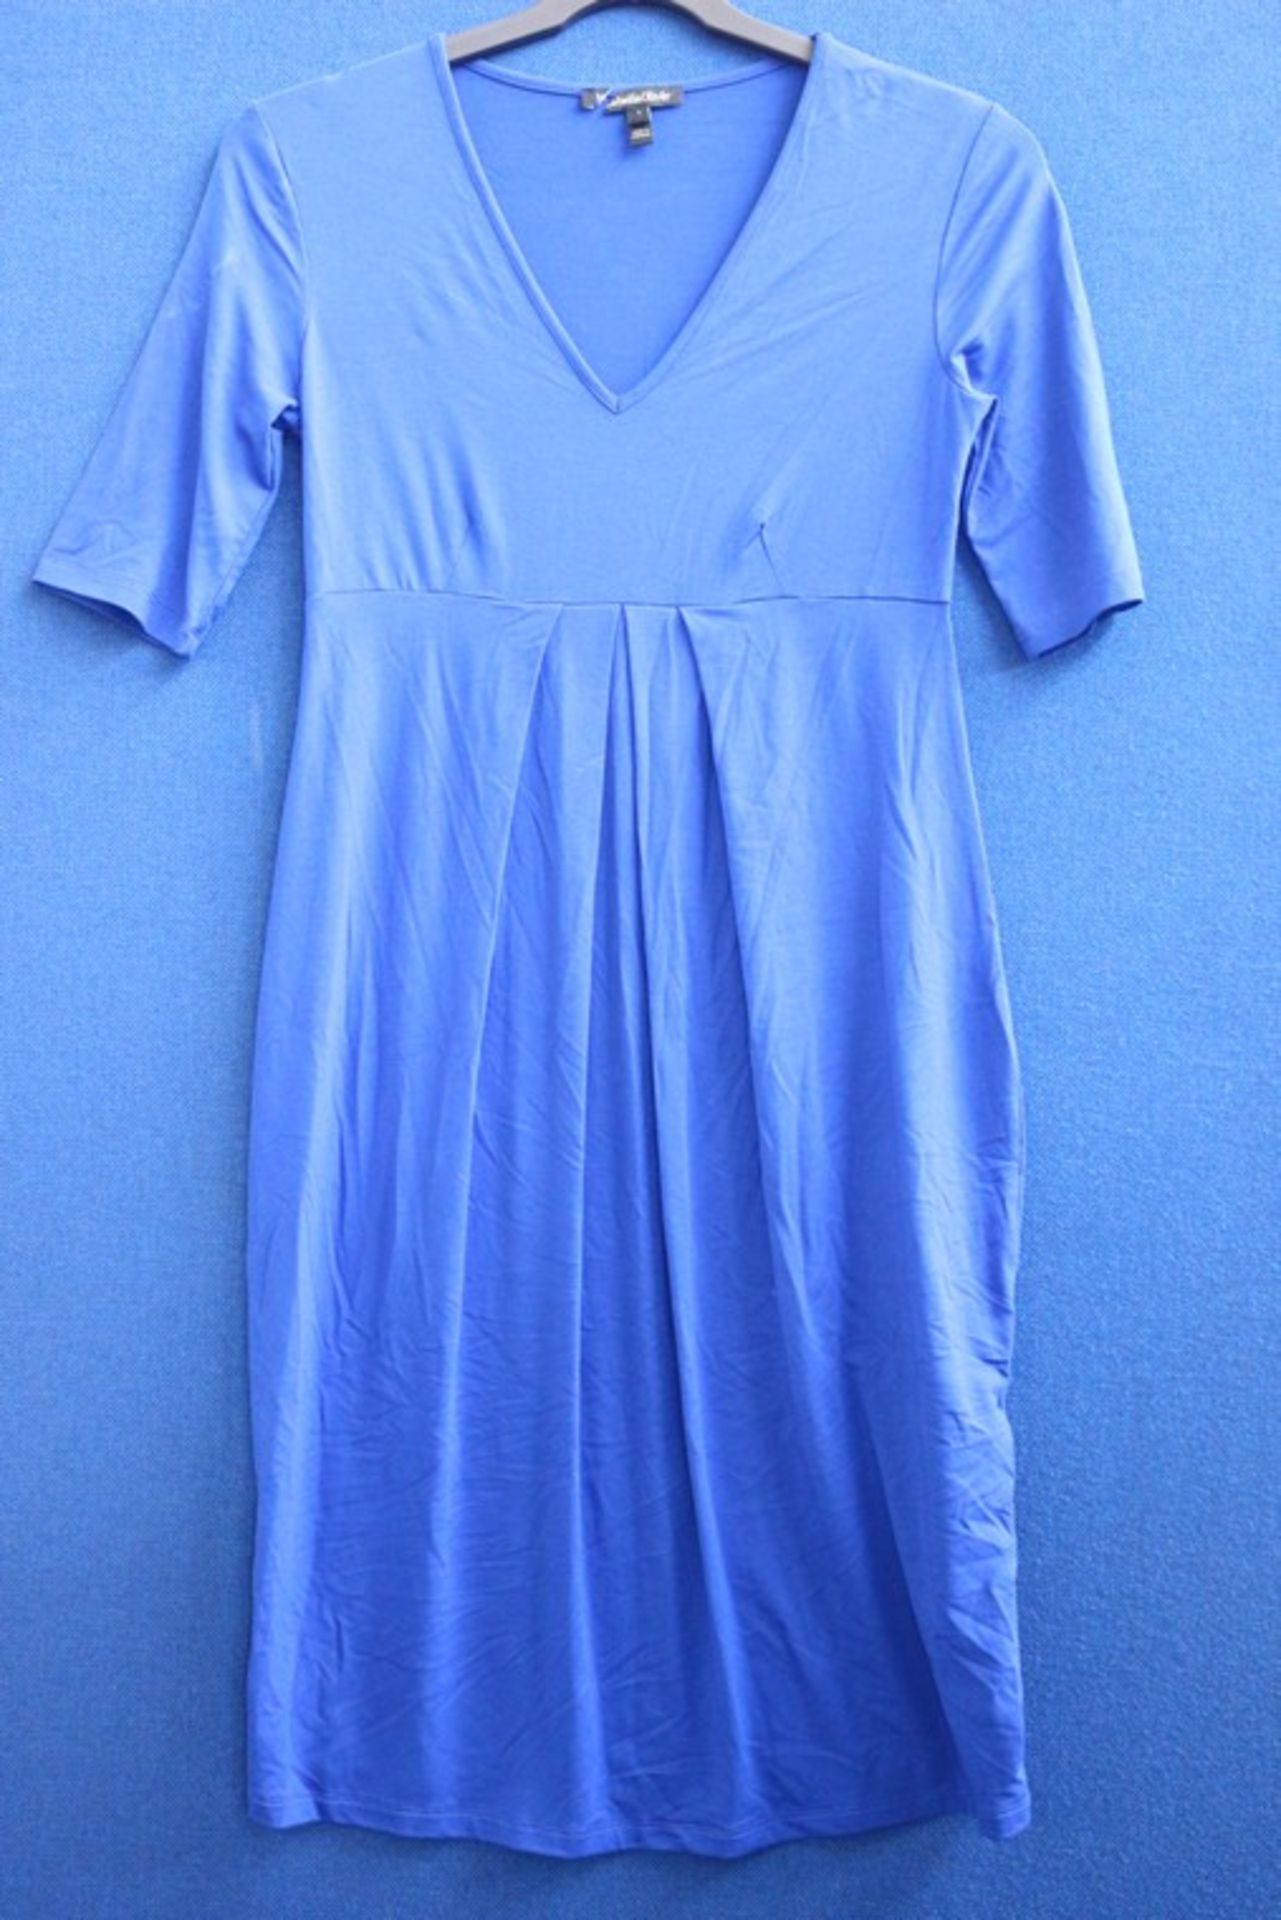 1 x ISABELLA OLIVER LADIES MATERNITY DRESS IN BLUE RRP £85 (9.9.16) *PLEASE NOTE THAT THE BID